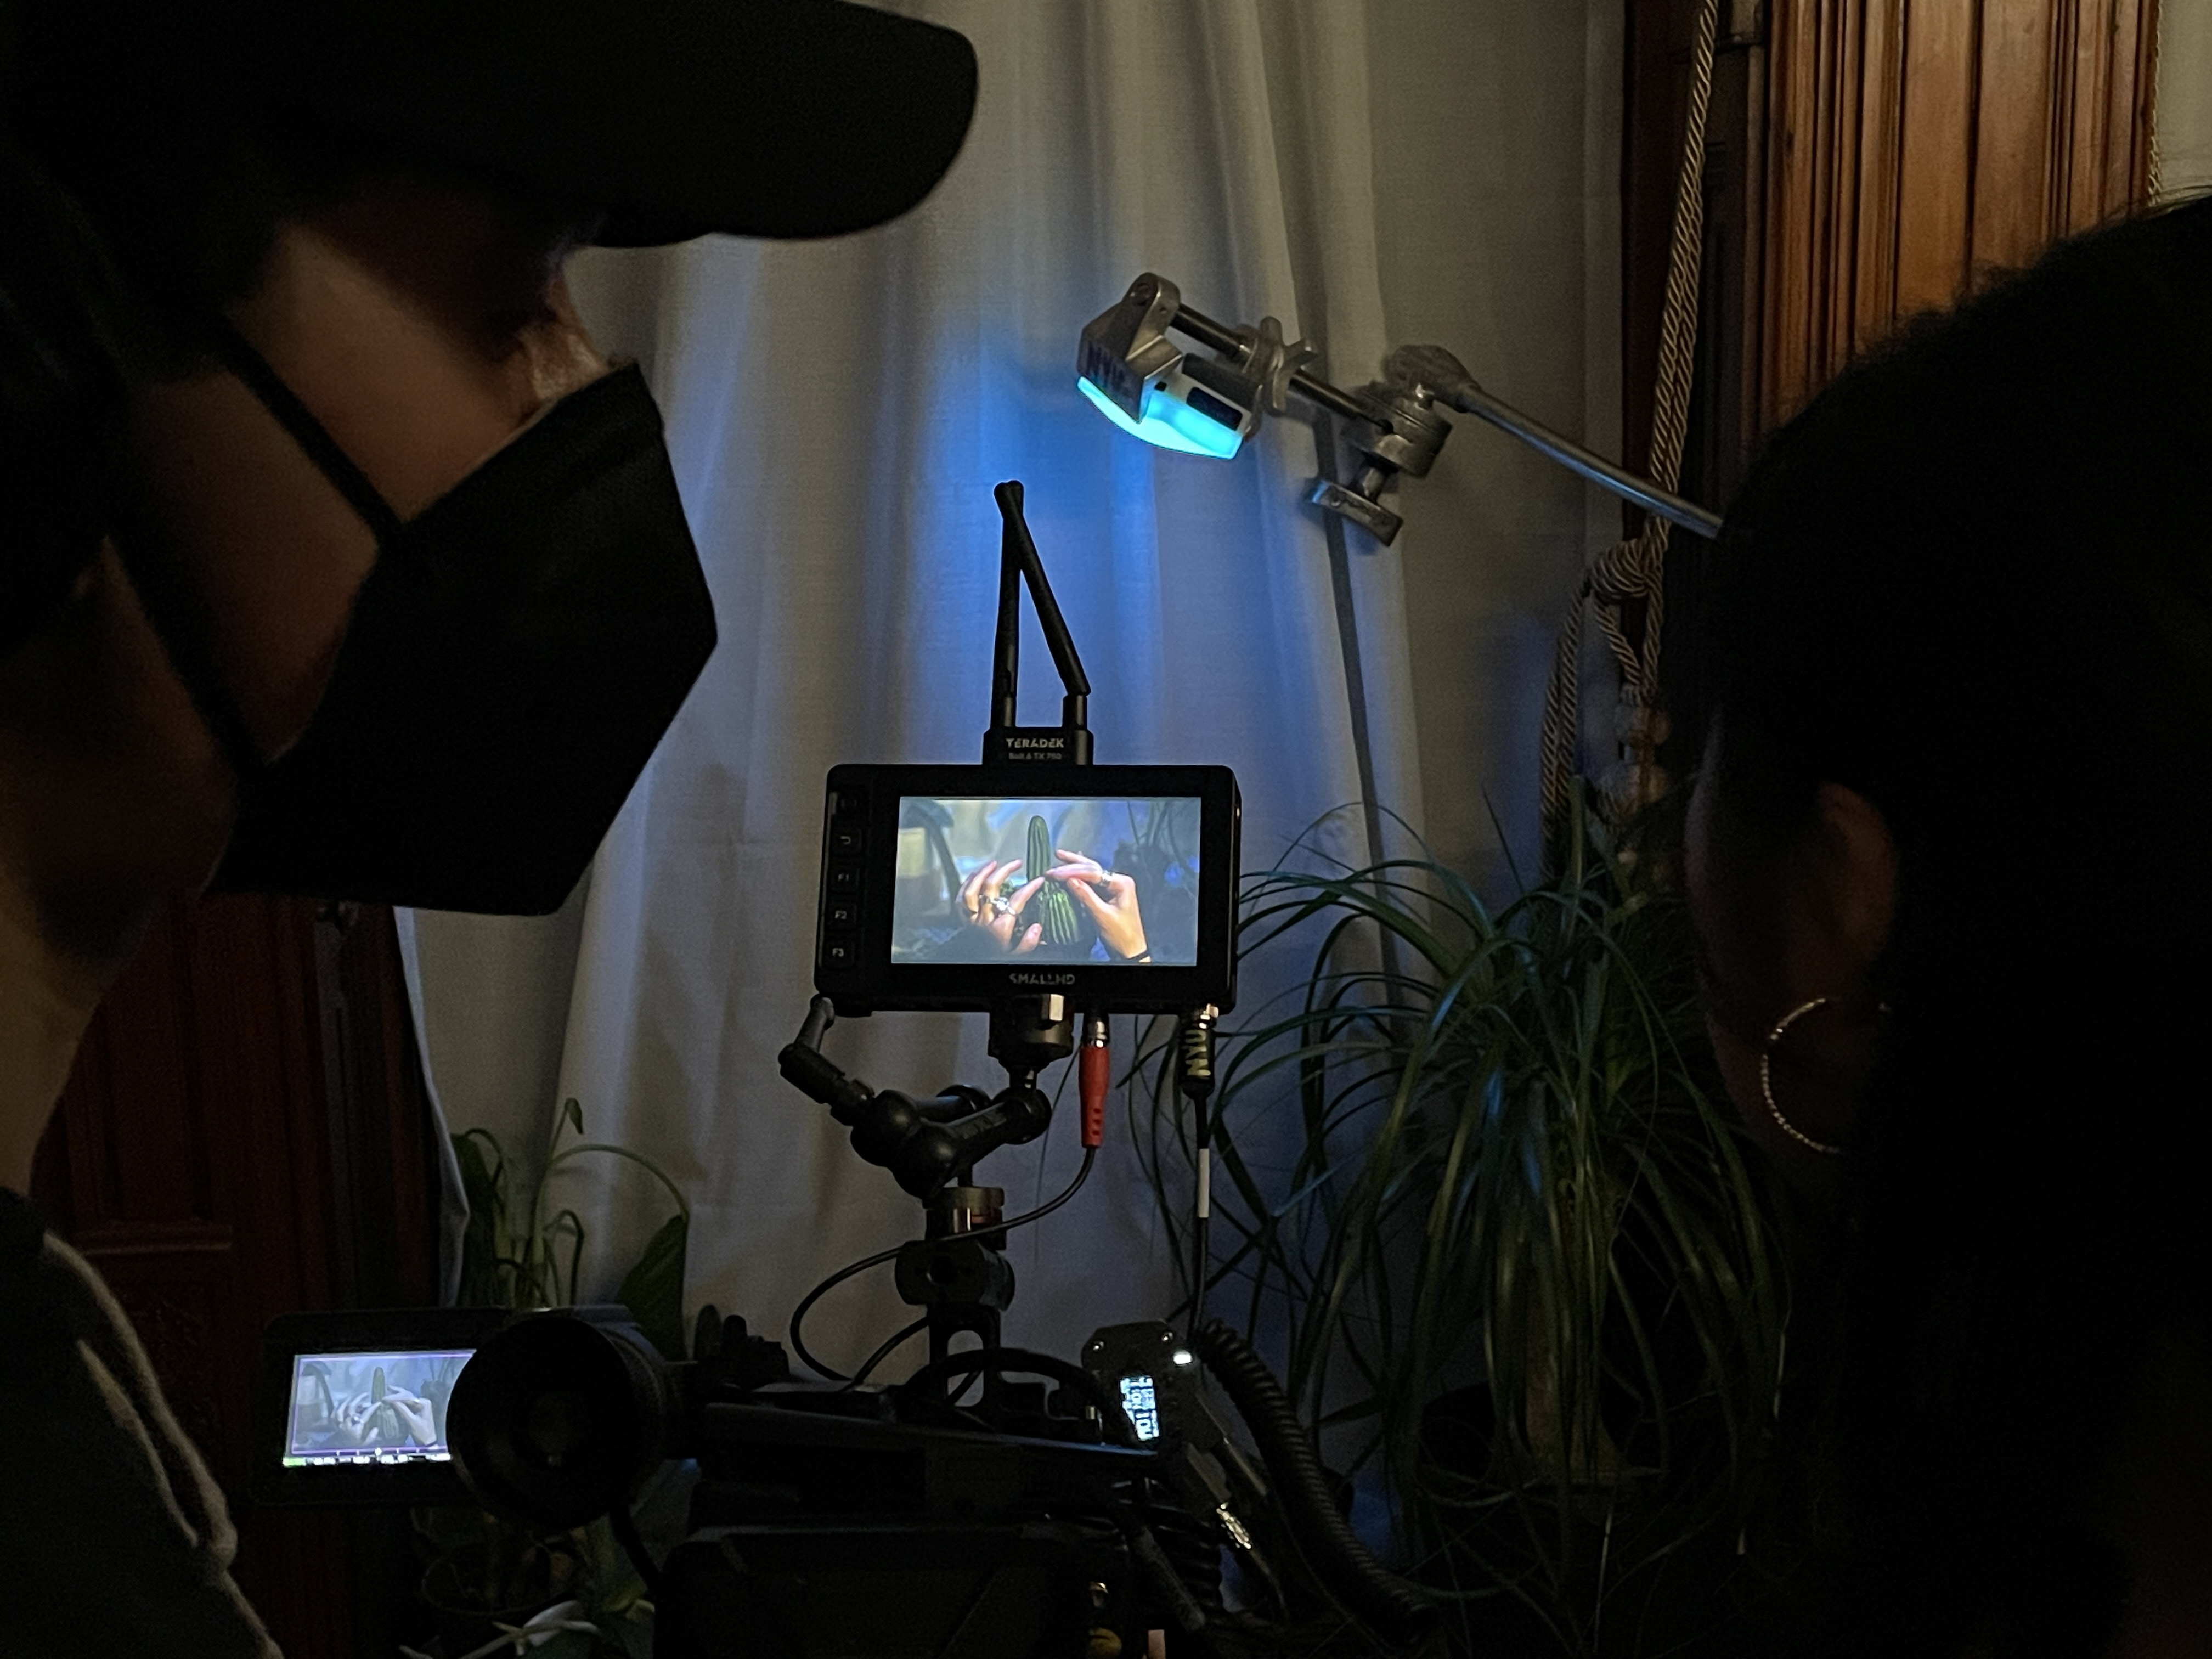 Lighting an indoor scene, looking at the monitor